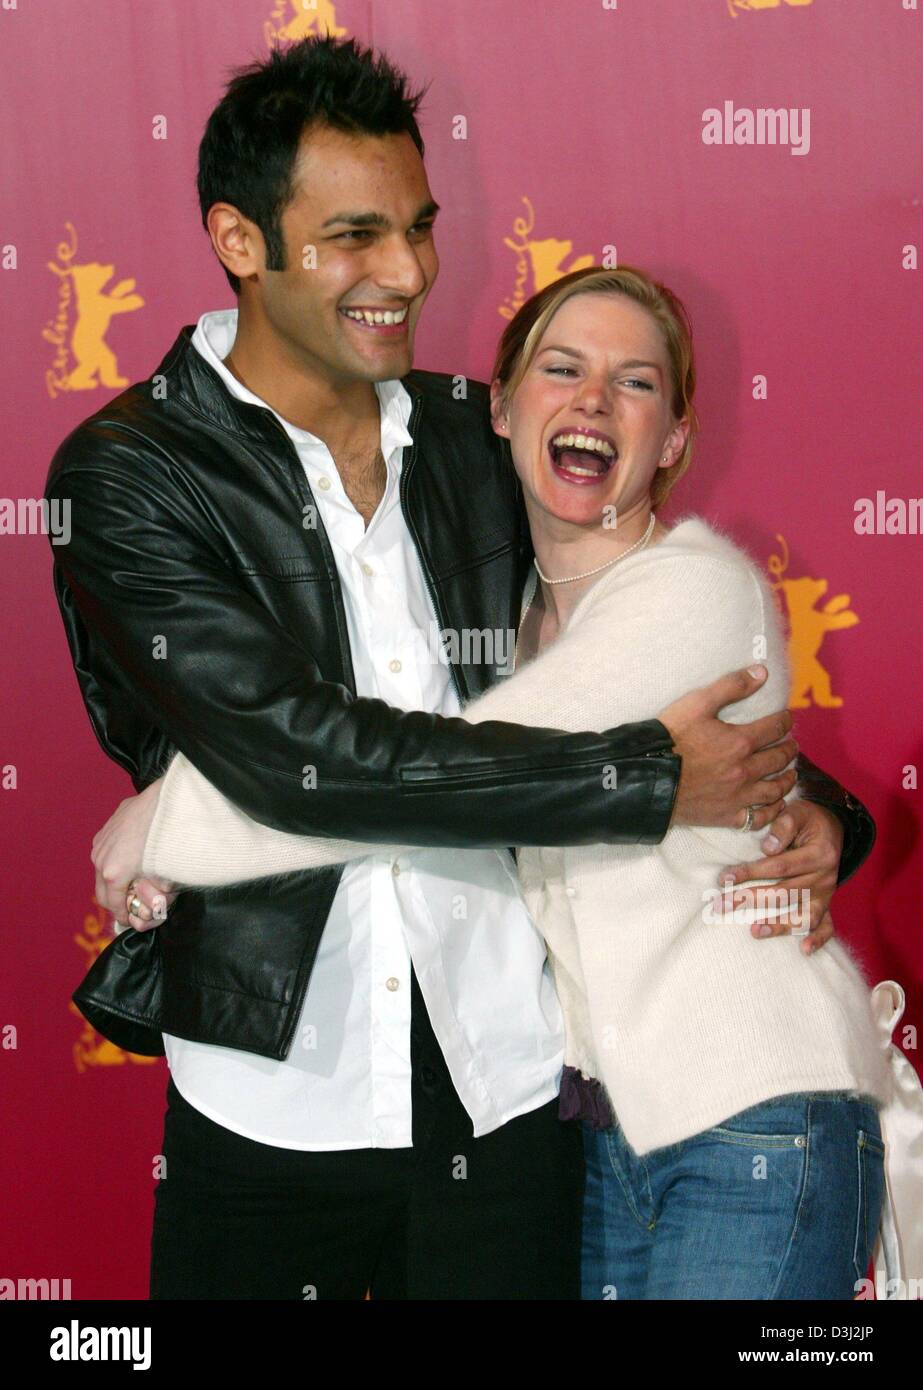 (dpa) - British actors Eva Birthistle and Atta Yaqub hug each other and smile as they attend a press conference during the 54th Berlinale International Film Festival in Berlin, 13 February 2004. Birthistle and Yaqub presented their new film 'A Fond Kiss'. The film tells the love story between a young Catholic woman from Glasgow and the son of Muslim immigrants from Pakistan. Stock Photo